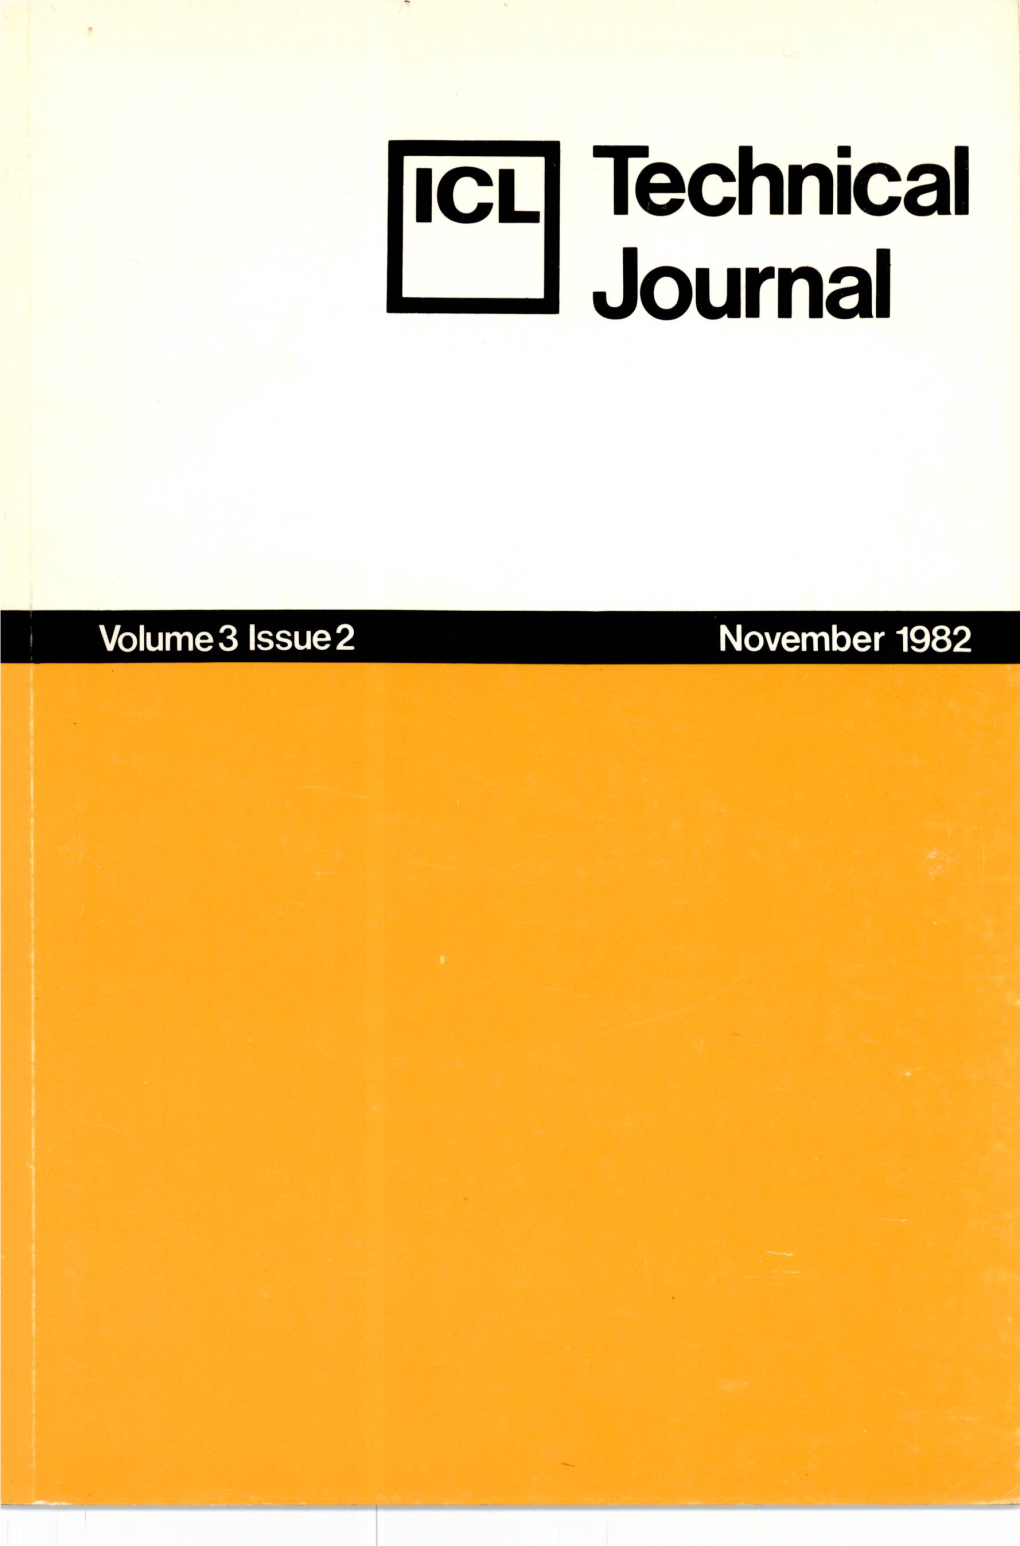 ICL Technical Journal Volume 3 Issue 2